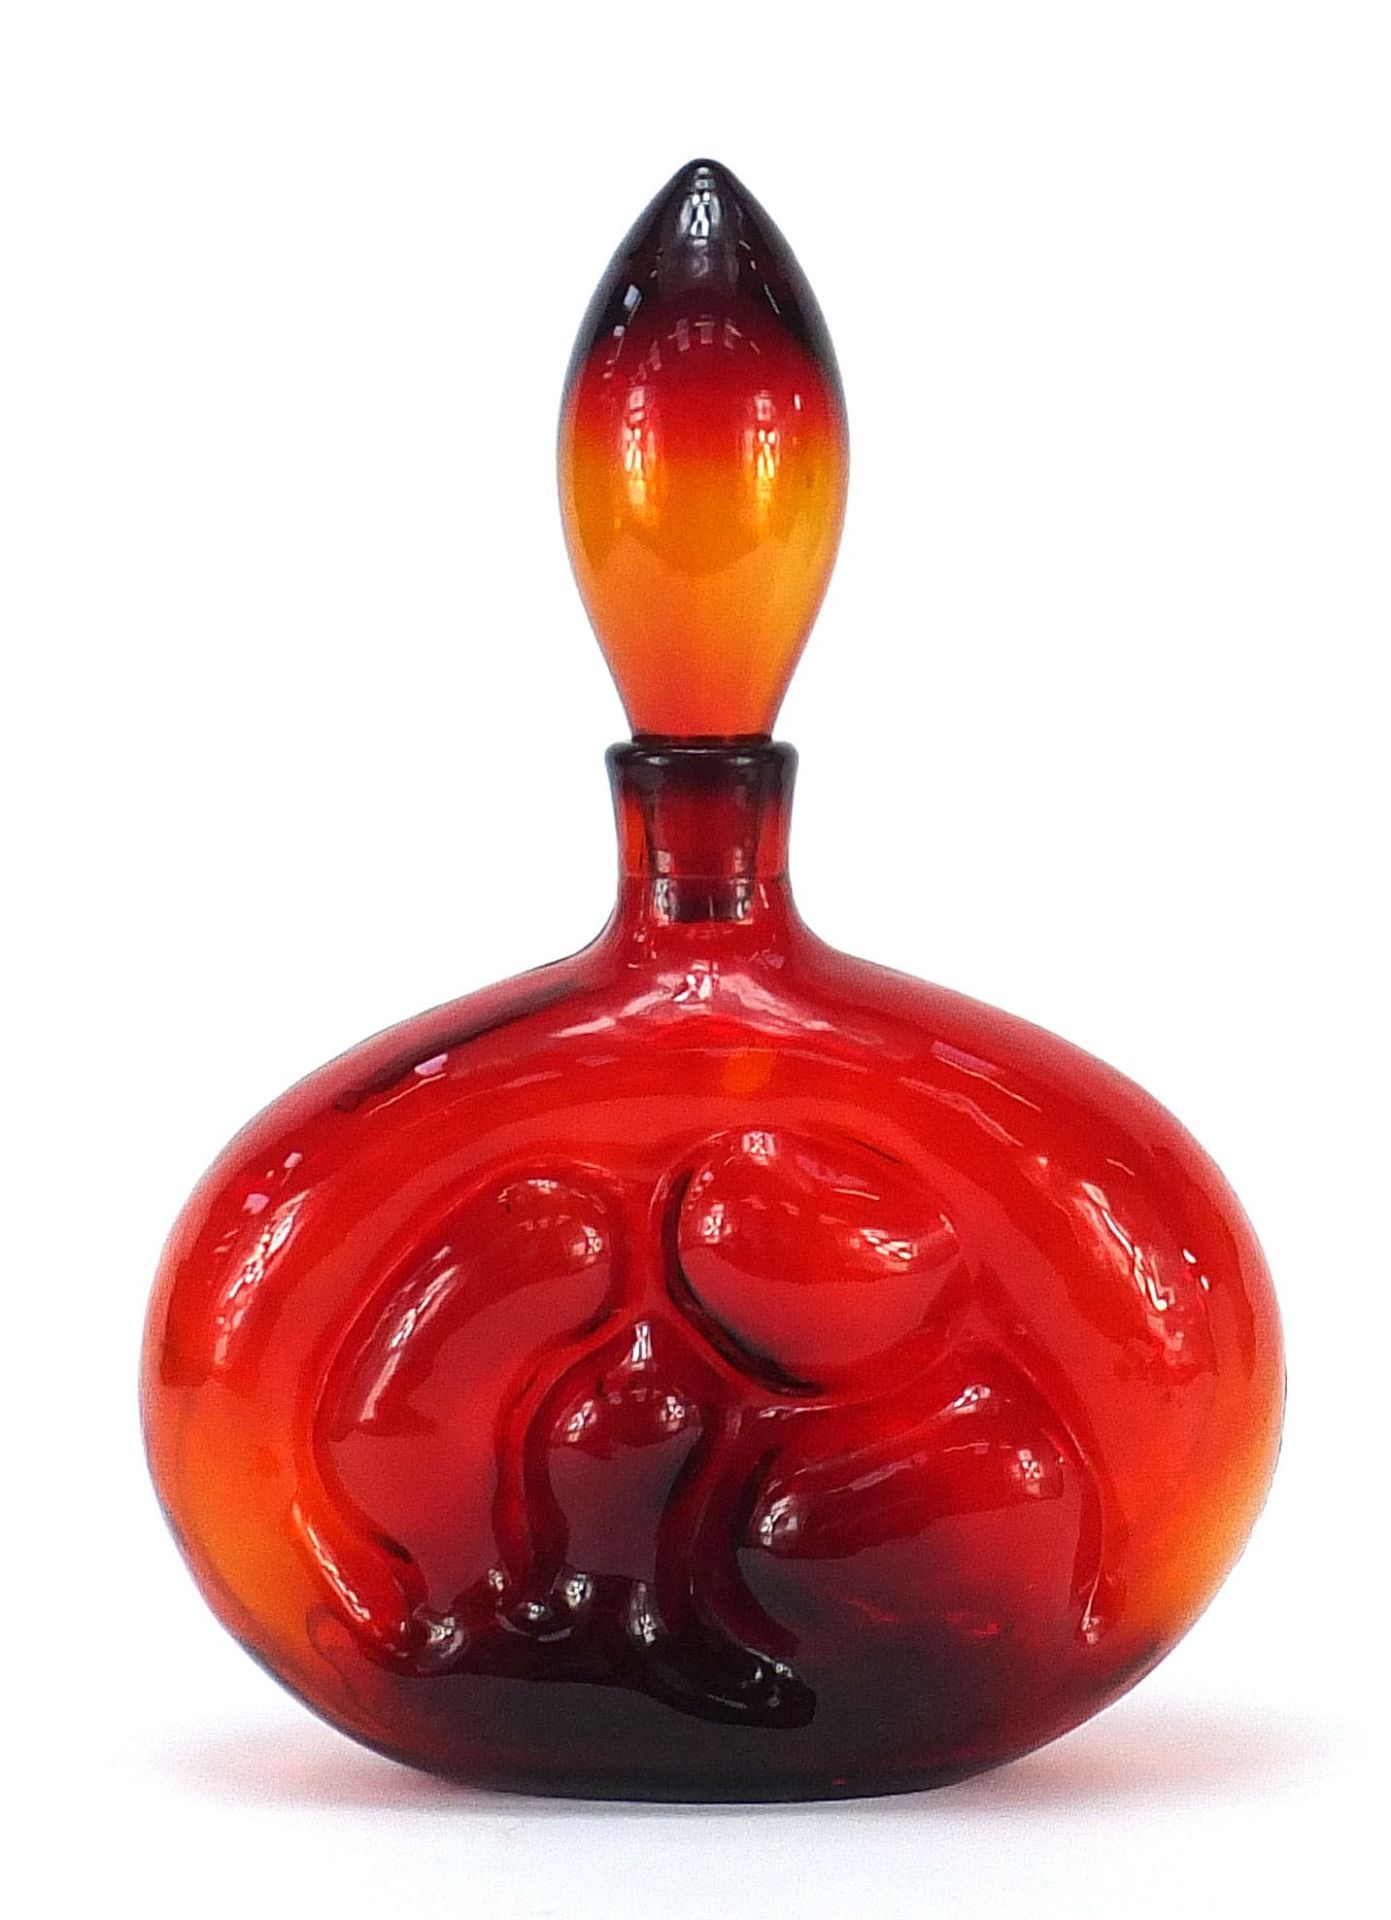 Blenko style studio glass decanter, 34.5cm high : For Further Condition Reports